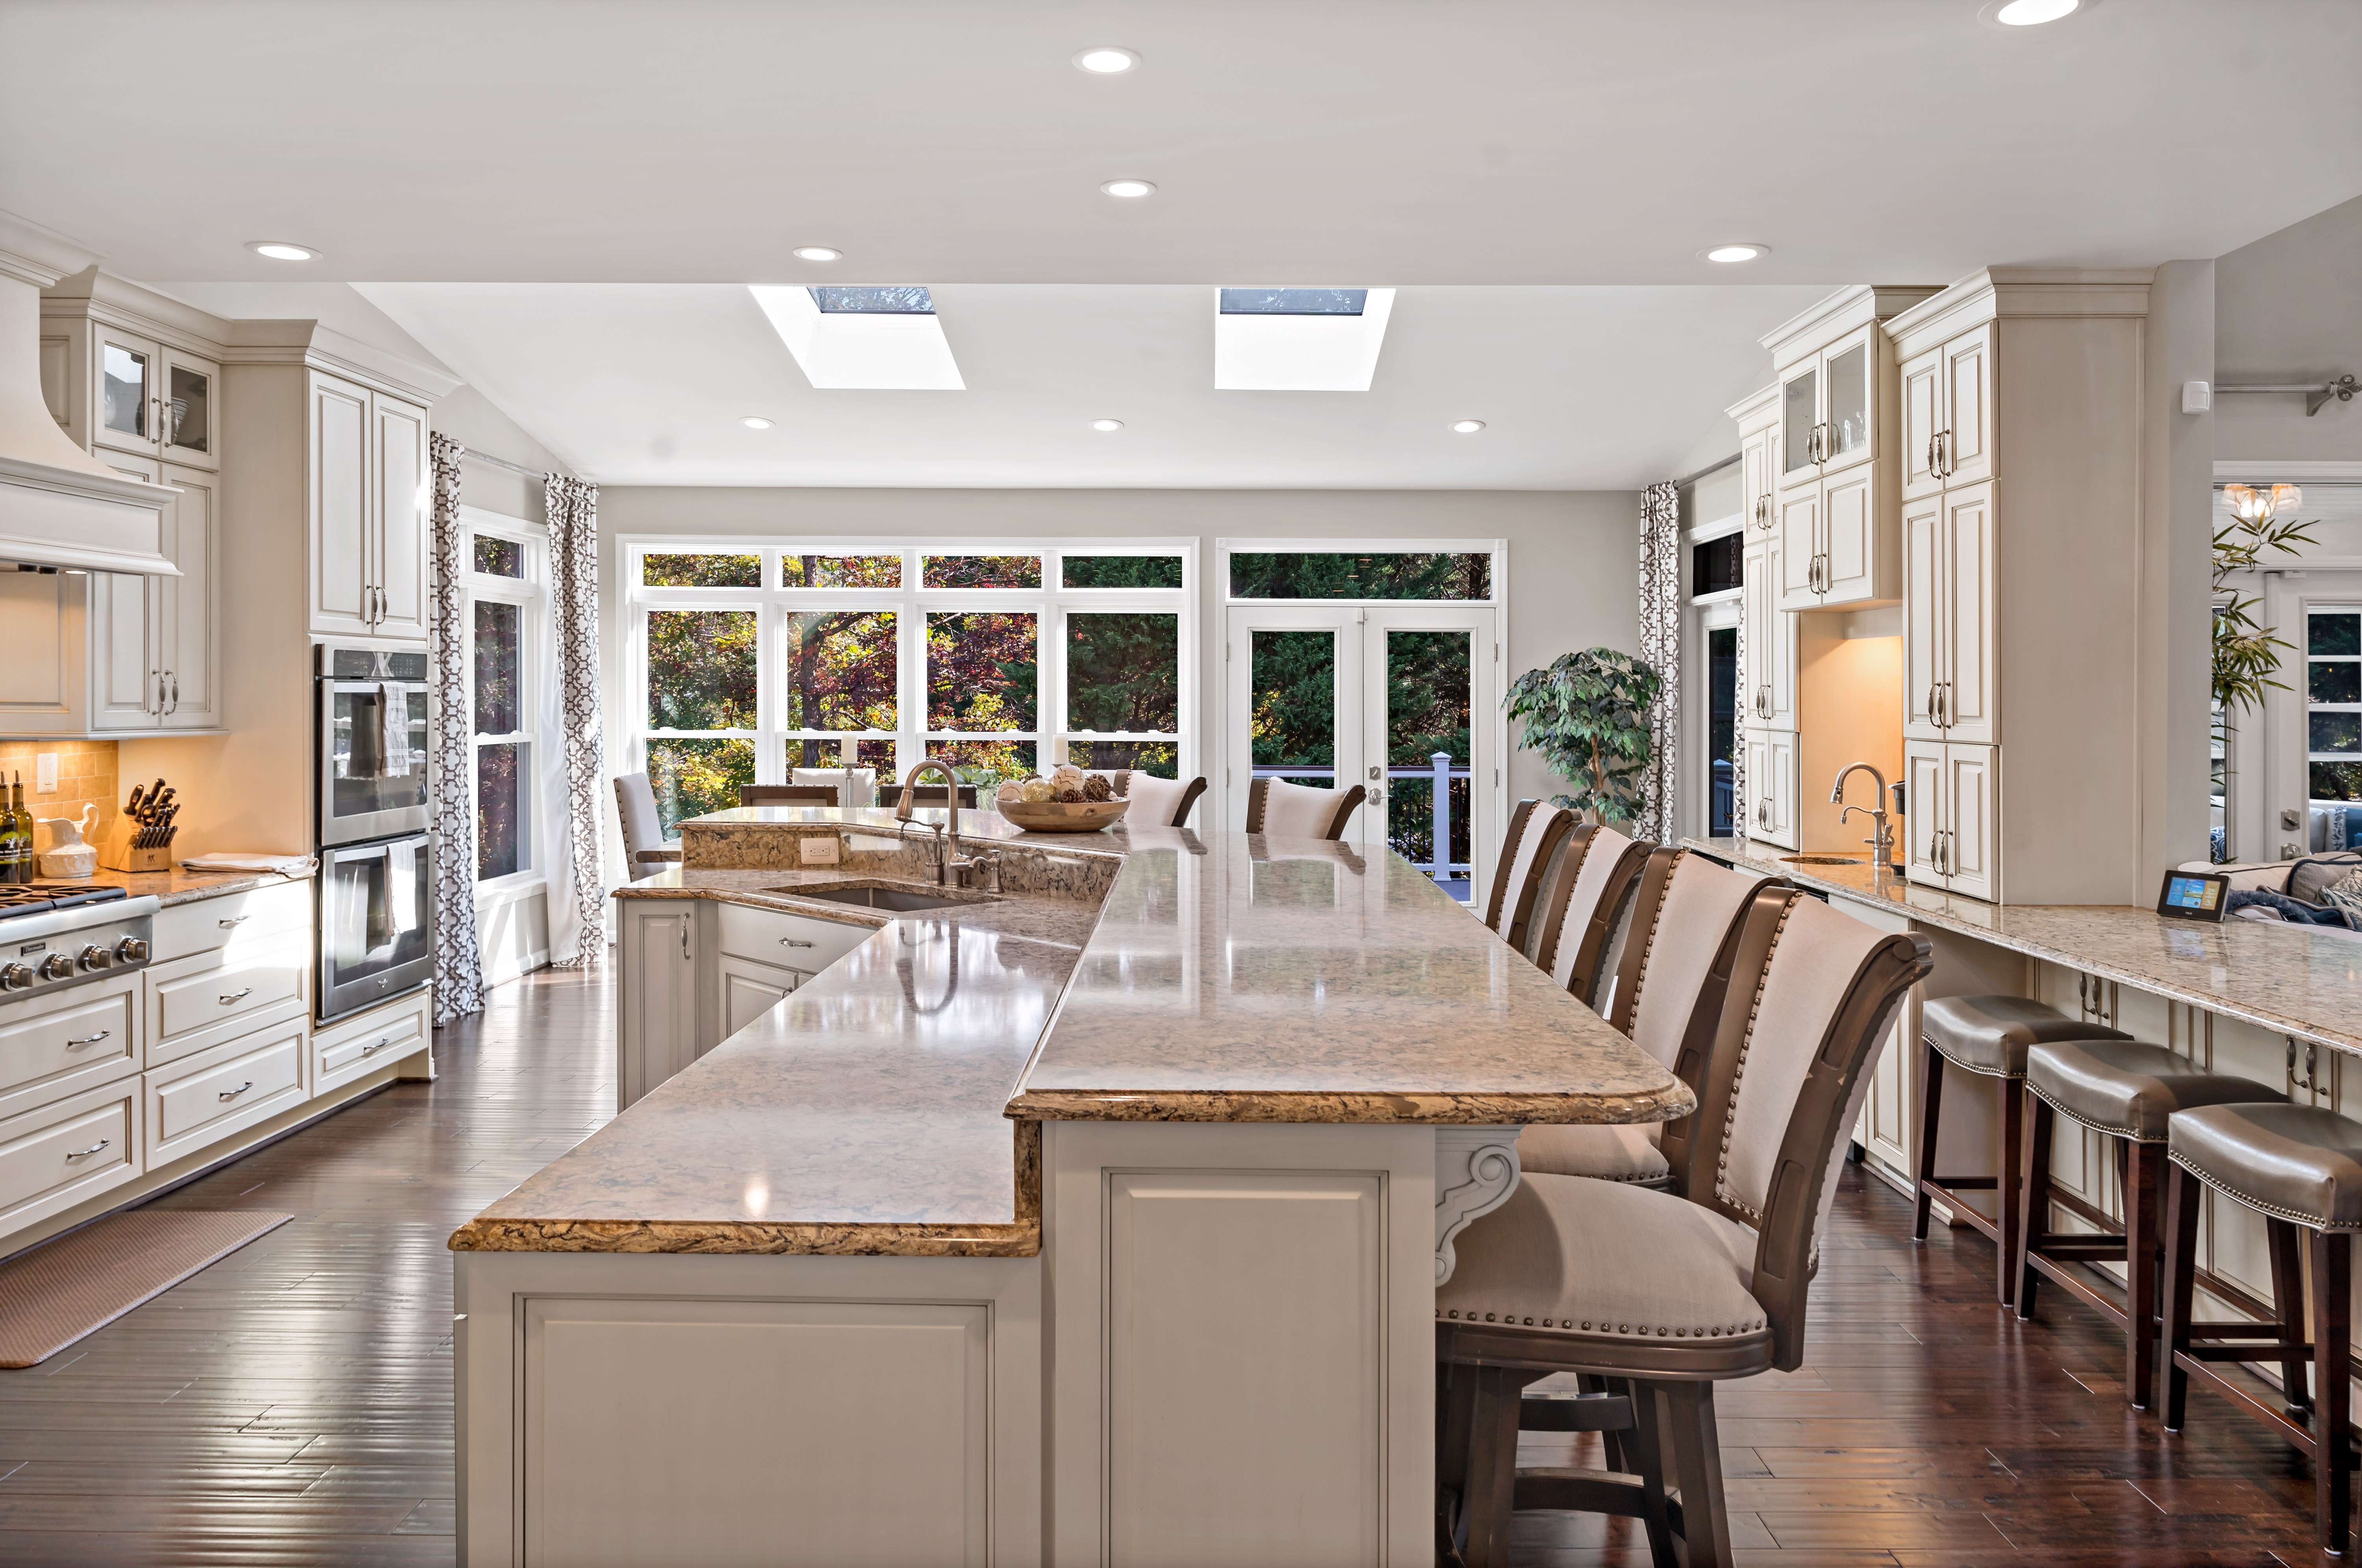 Cream kitchen with long curved island with seating